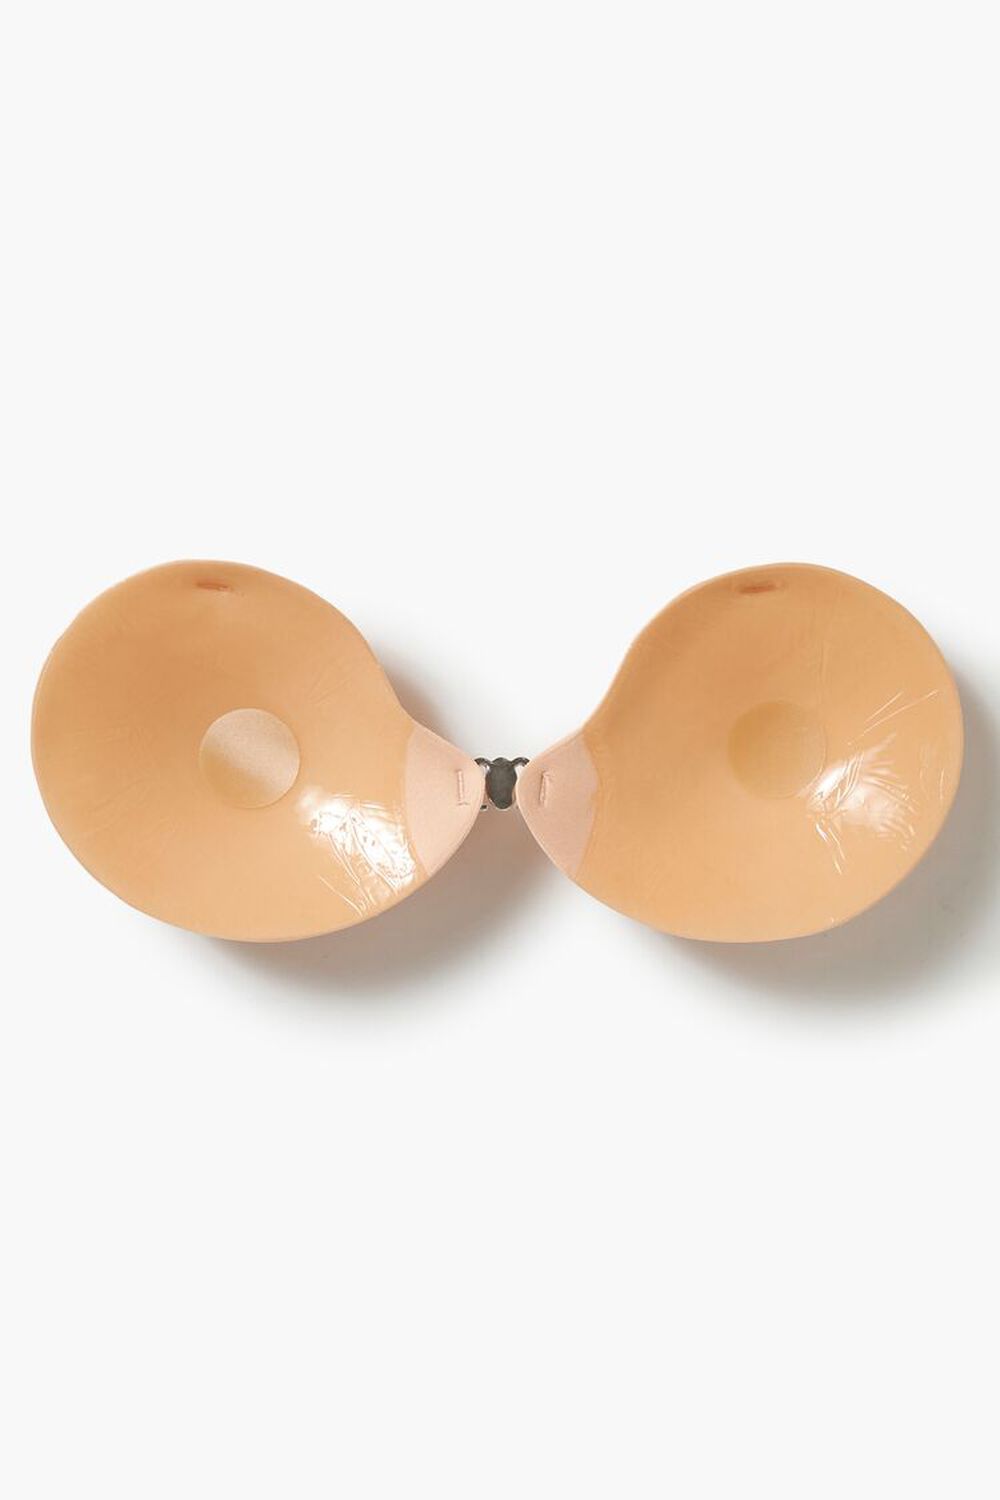 Shimmer Gold Breathable Reusable Strapless Adhesive Bra Nipple Protection, Shop Today. Get it Tomorrow!